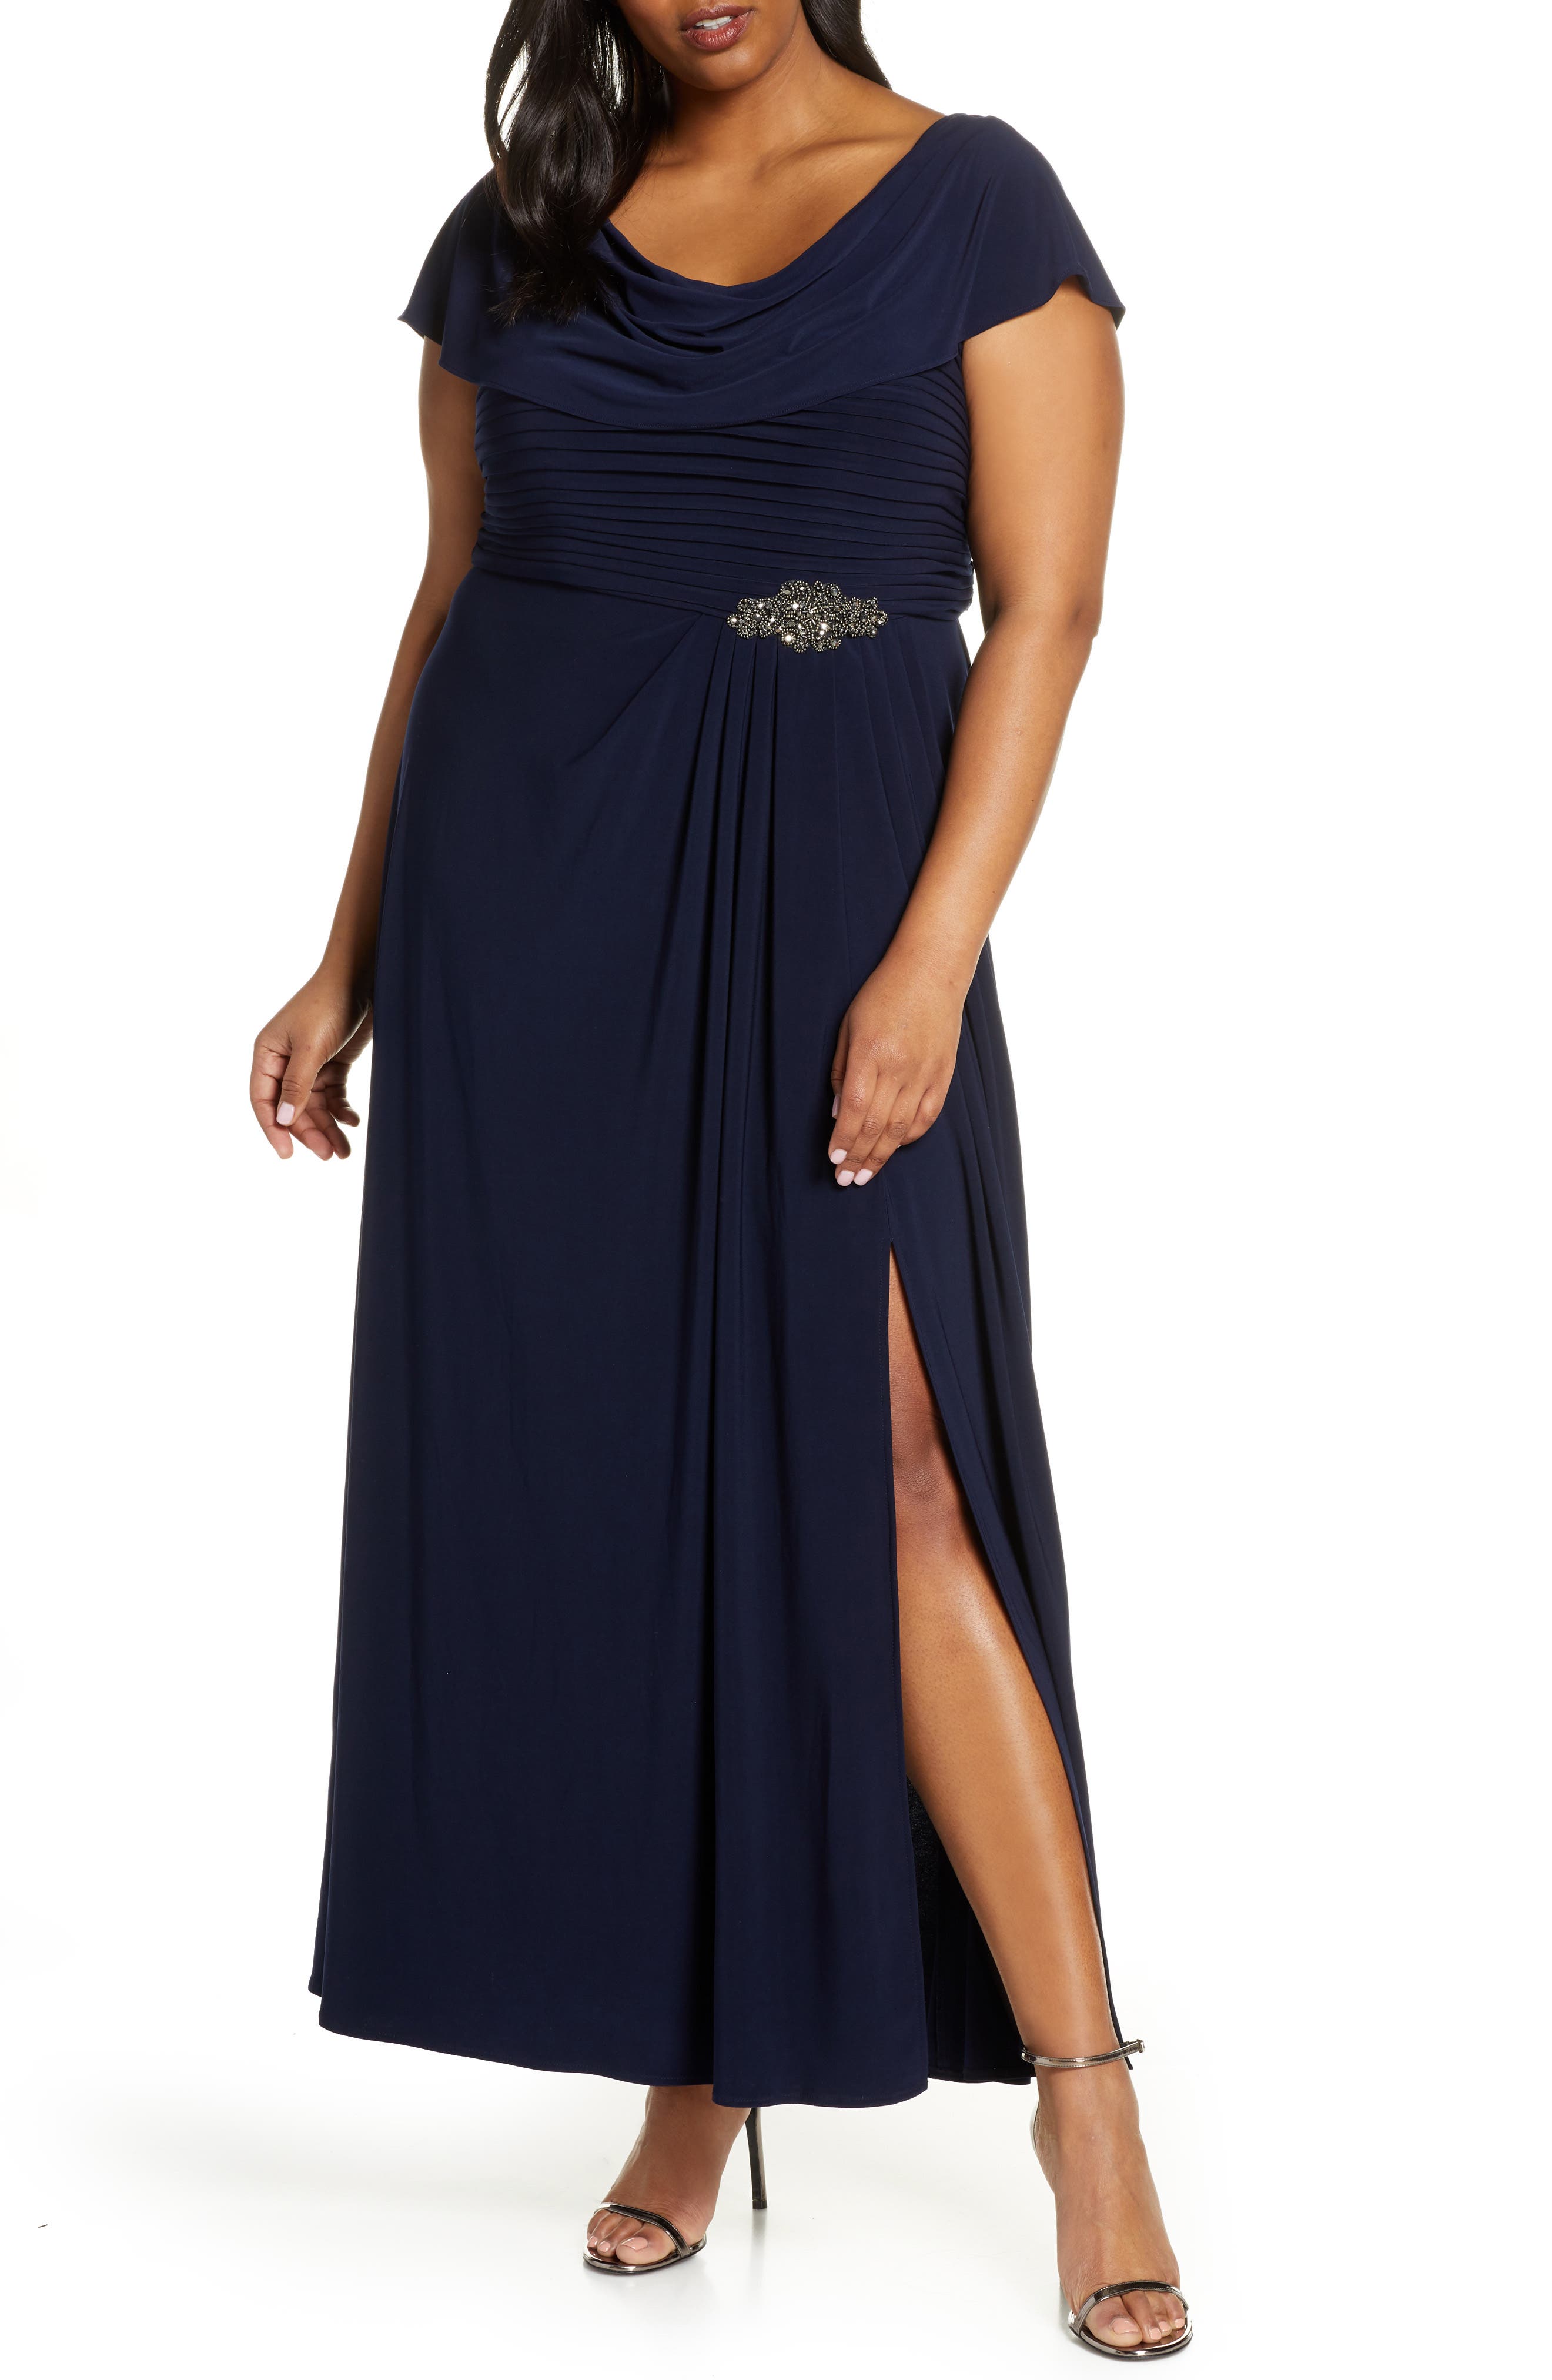 navy blue dress for wedding guest plus size